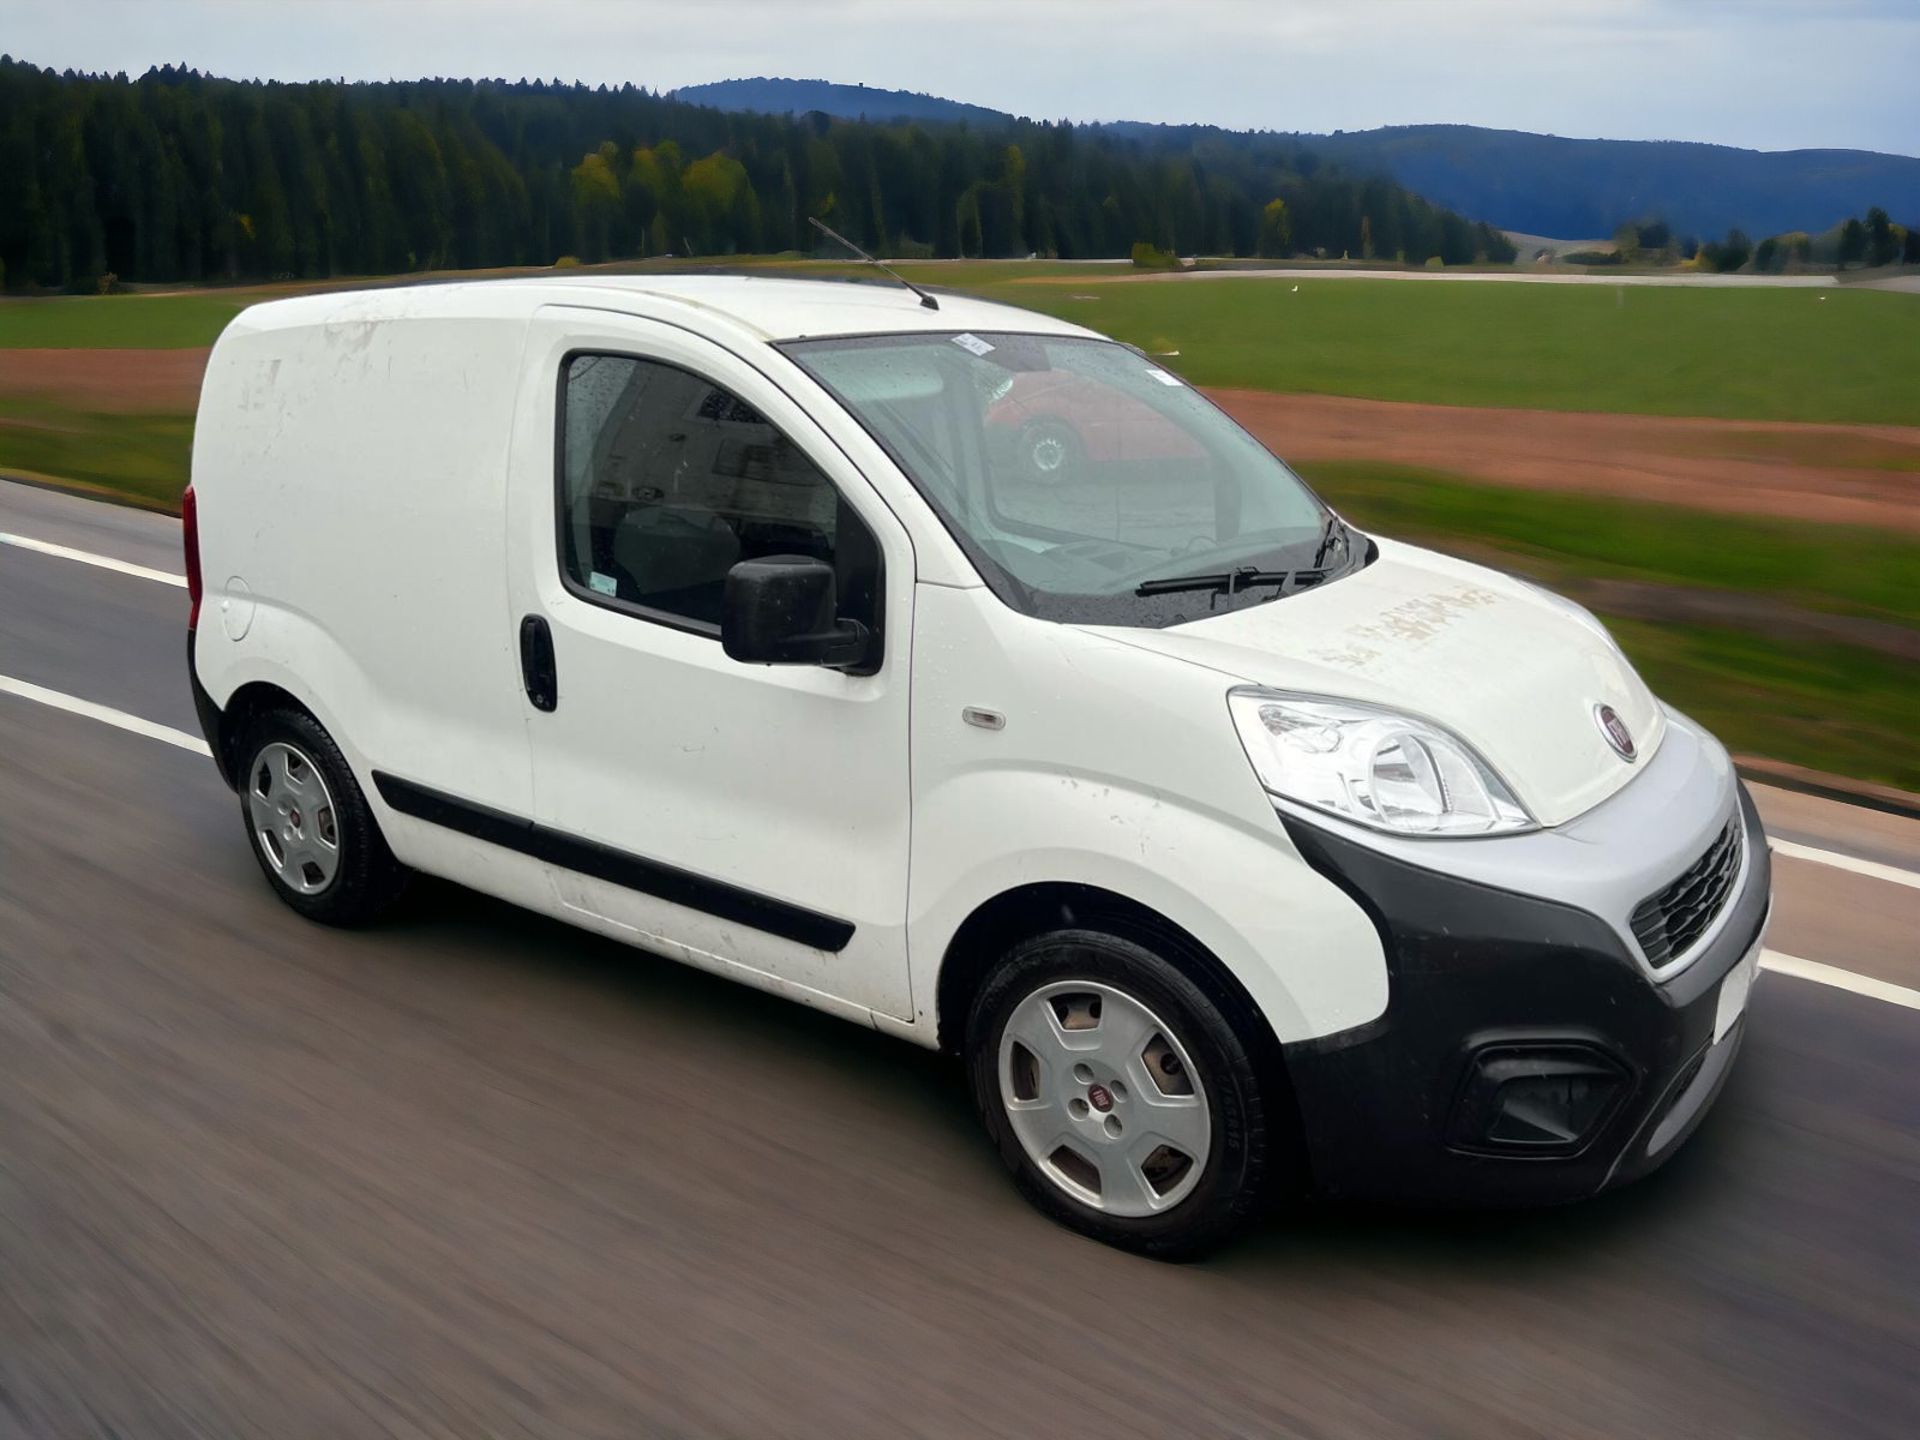 **SPARES OR REAPIRS** 2019 FIAT FIORINO SX 1.3 HDI VAN - YOUR RELIABLE BUSINESS COMPANION - Image 5 of 11